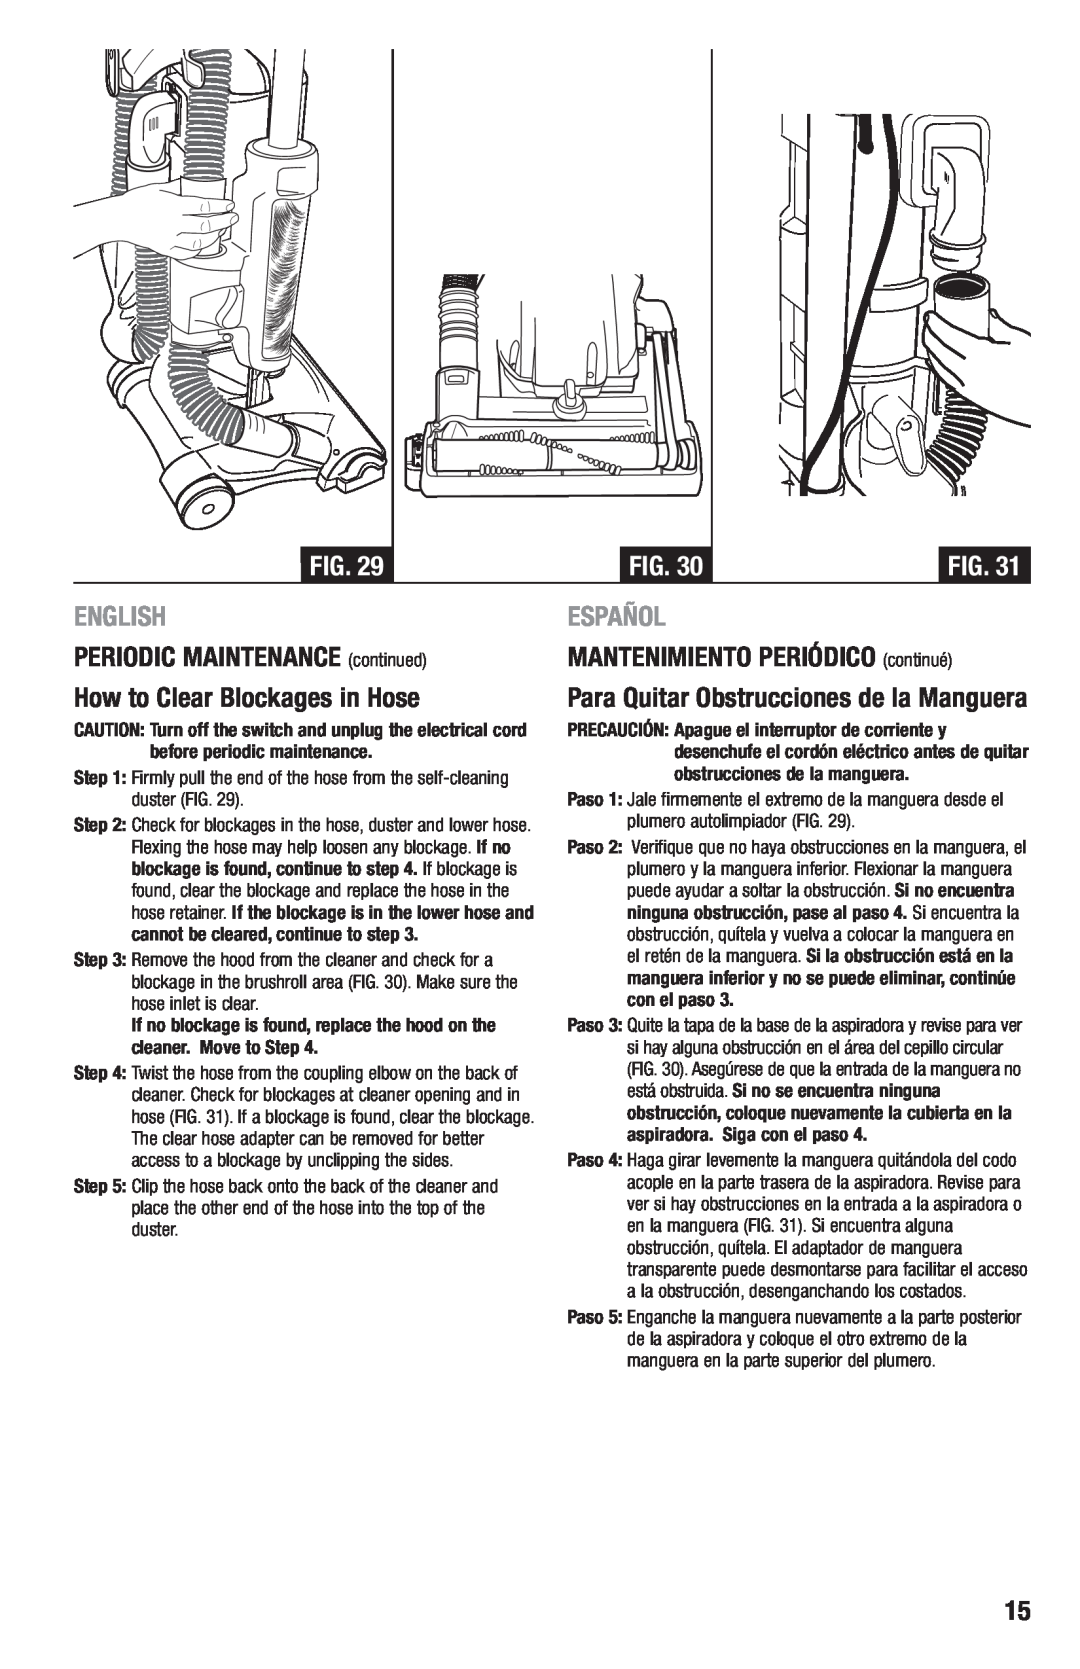 Eureka 2970-2999 Series manual English, PERIODIC MAINTENANCE continued How to Clear Blockages in Hose, Español 